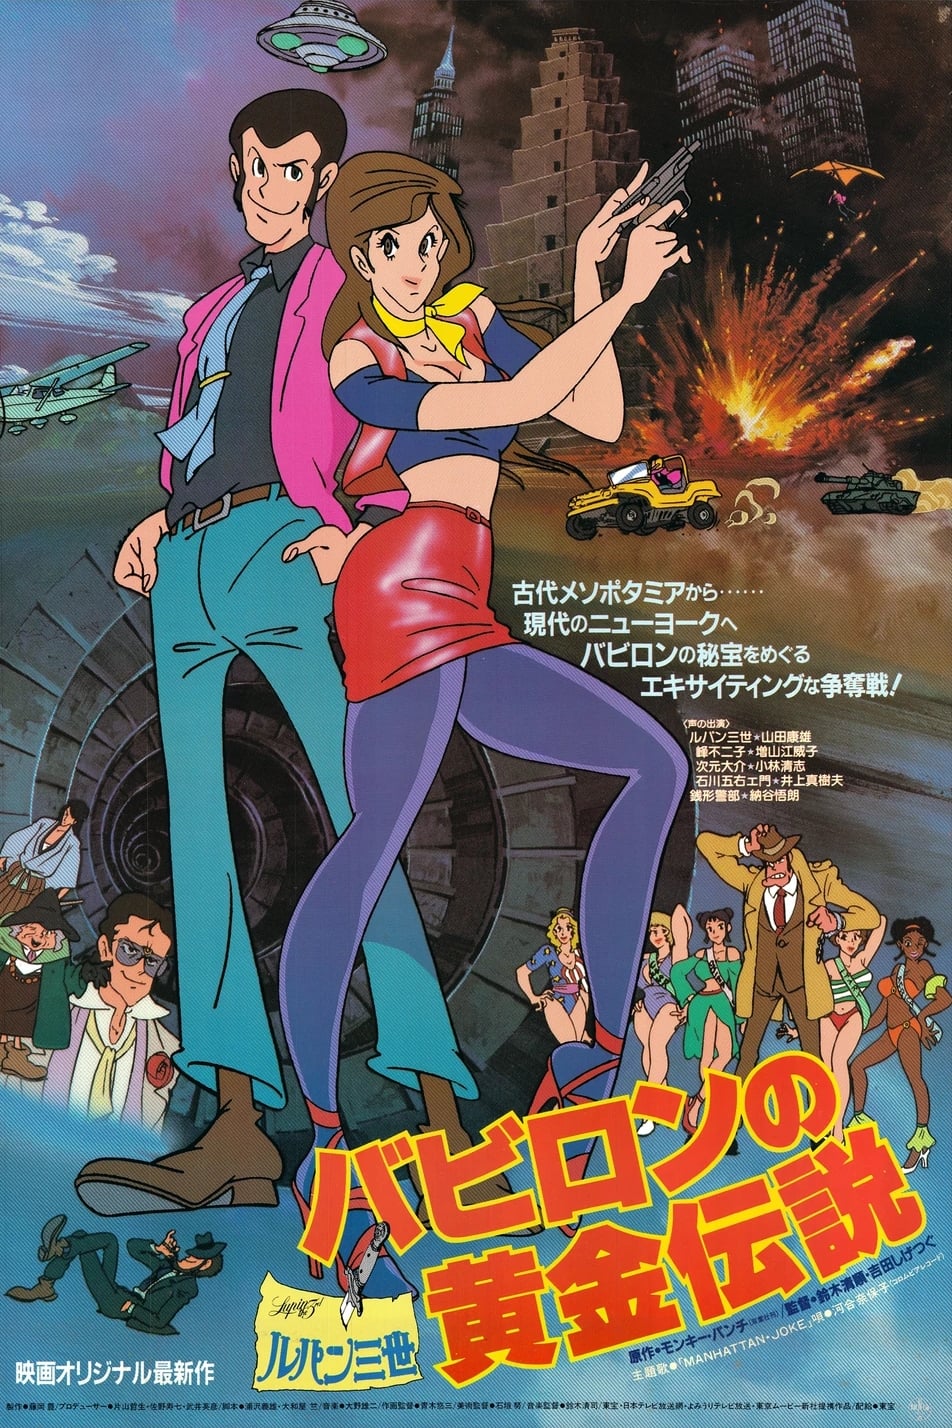 Lupin the Third  streaming tv show online